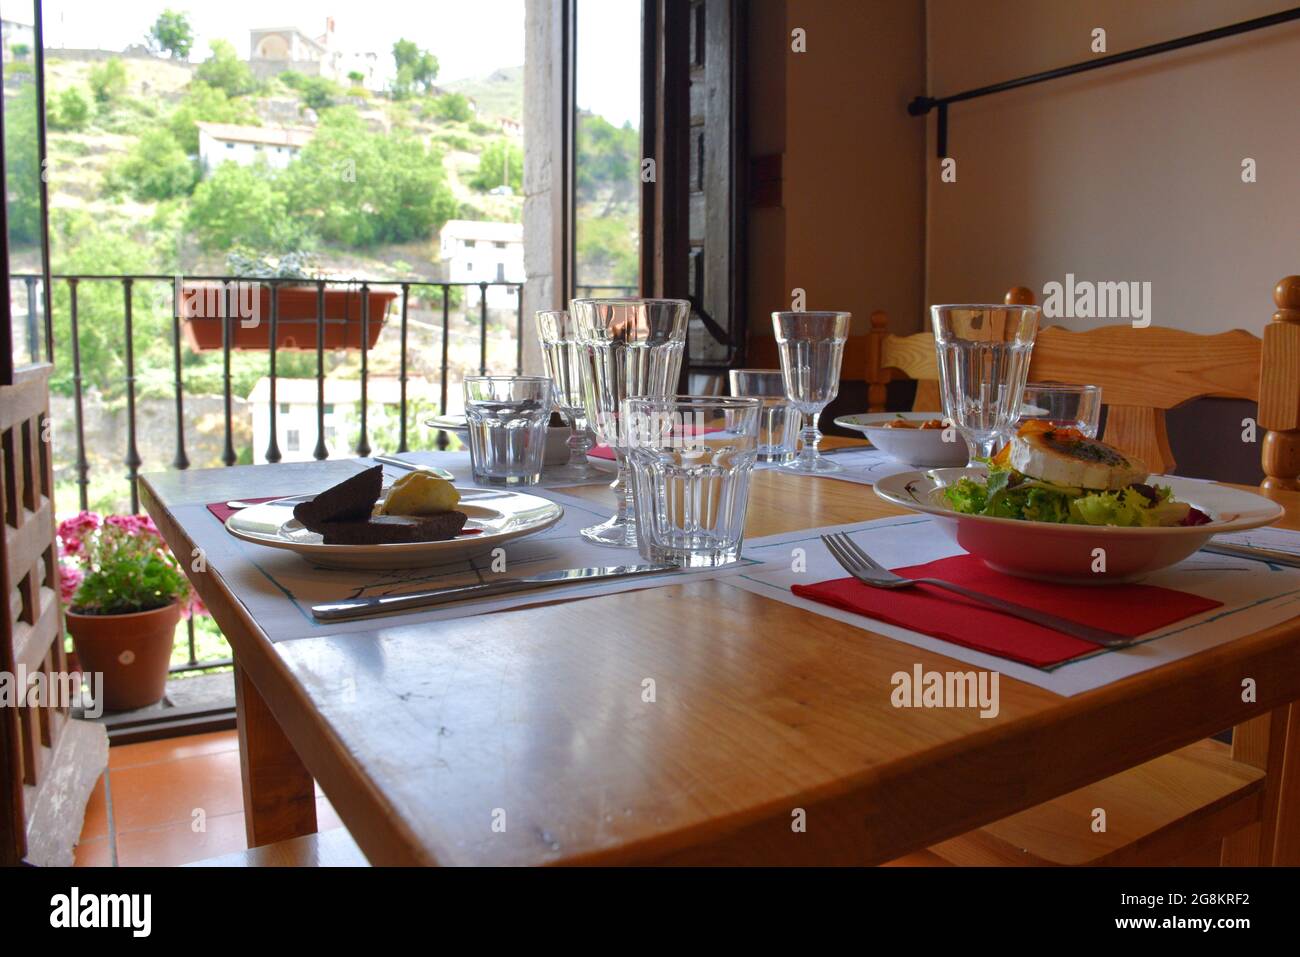 Restaurant table with dishes from the daily menu ready to be tasted. Located next to sale and overlooking a rural mountain area. Stock Photo